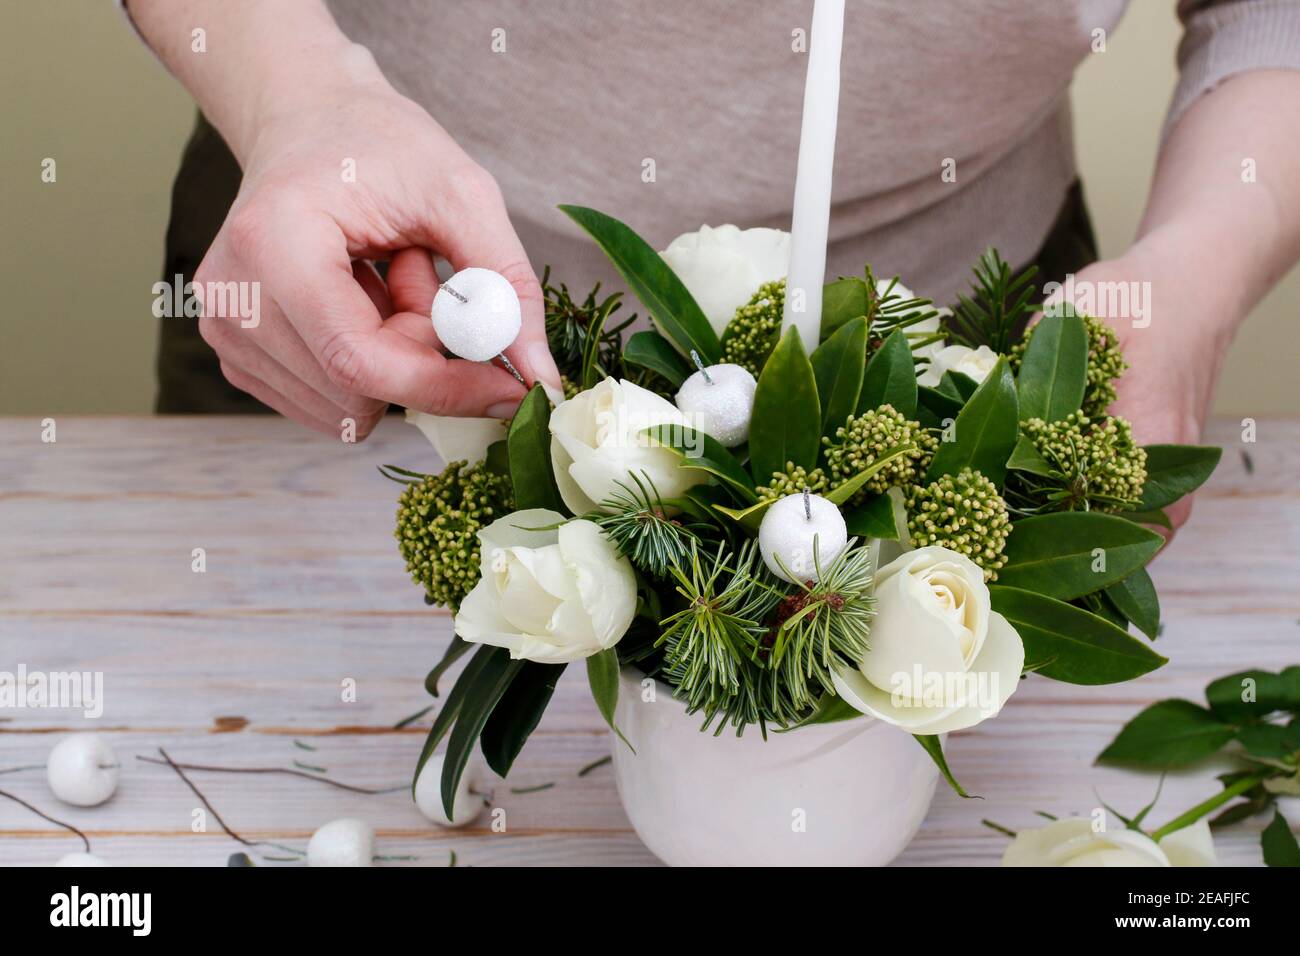 Florist at work: woman shows how to make floral arrangement with white roses, skimmia, an evergreen shrub, and fir twigs. Step by step, tutorial. Stock Photo